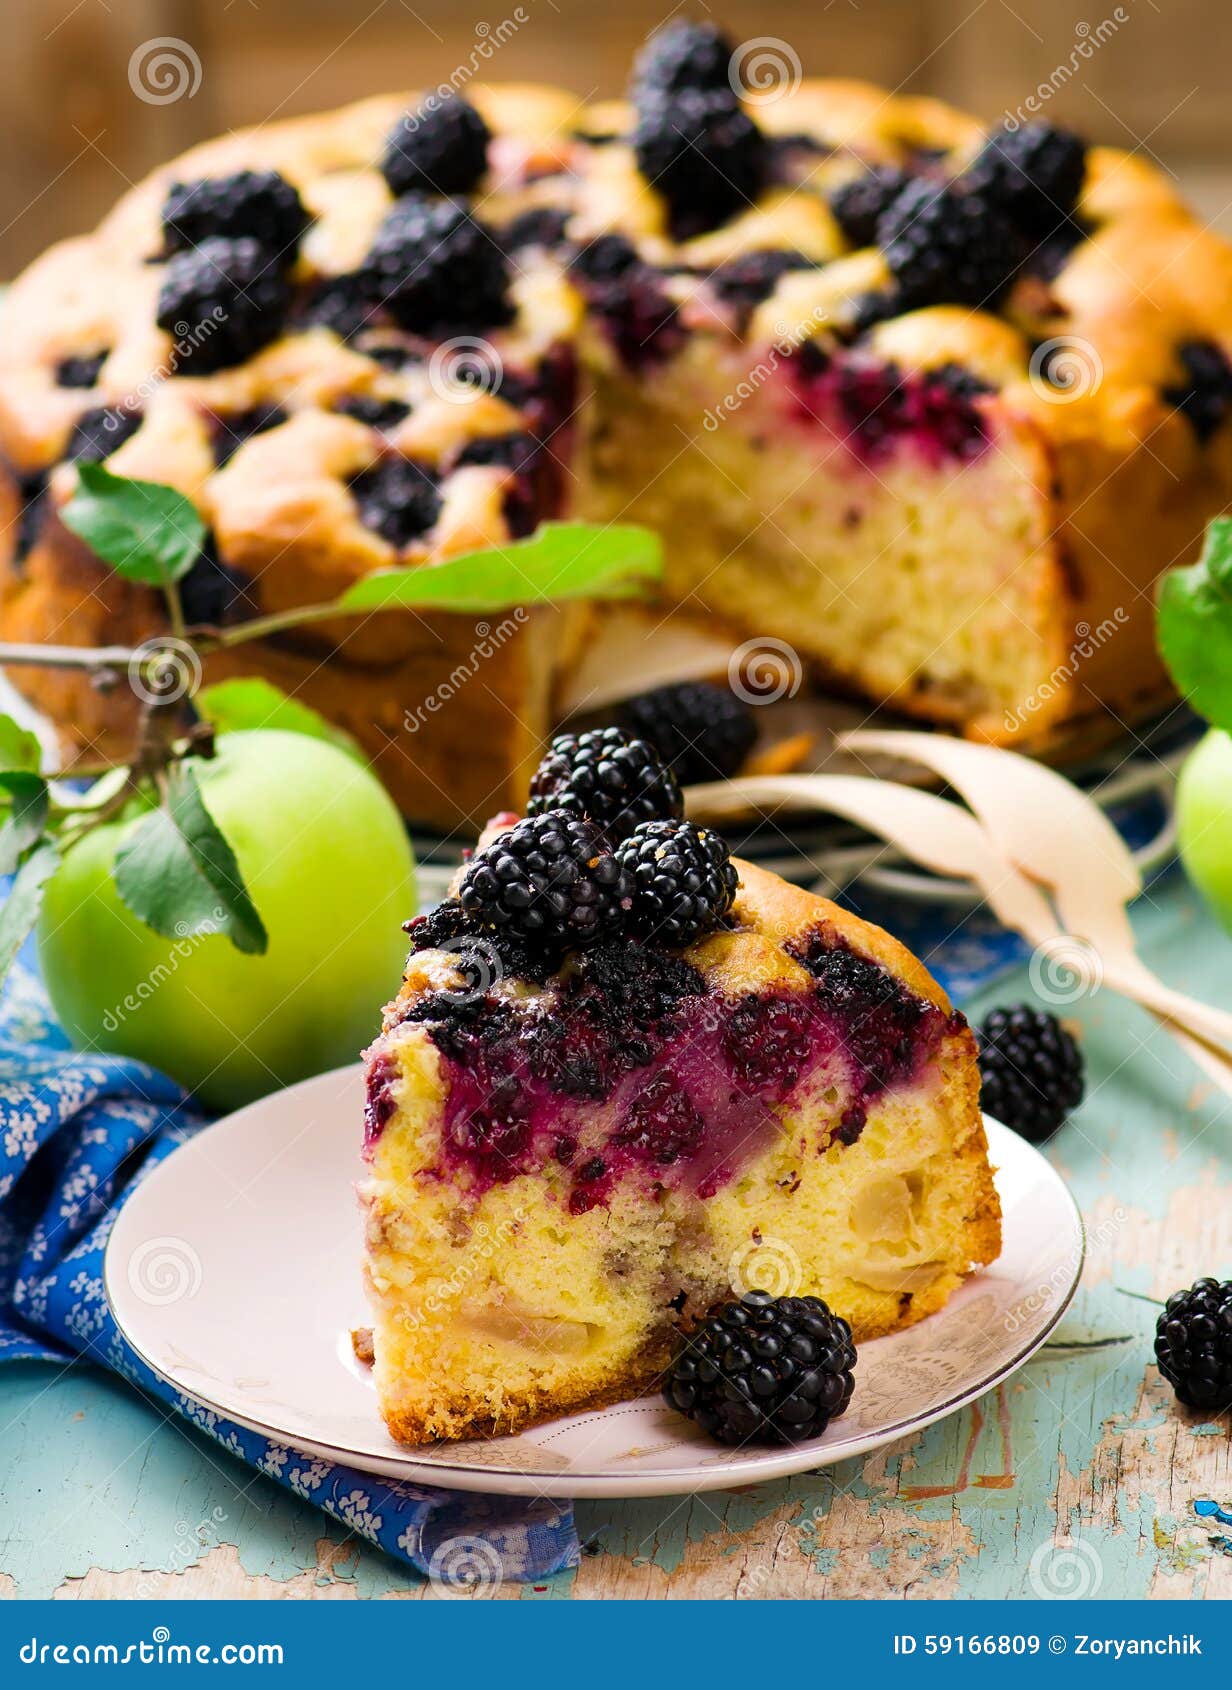 Blackberry and apples pie stock image. Image of slice - 59166809